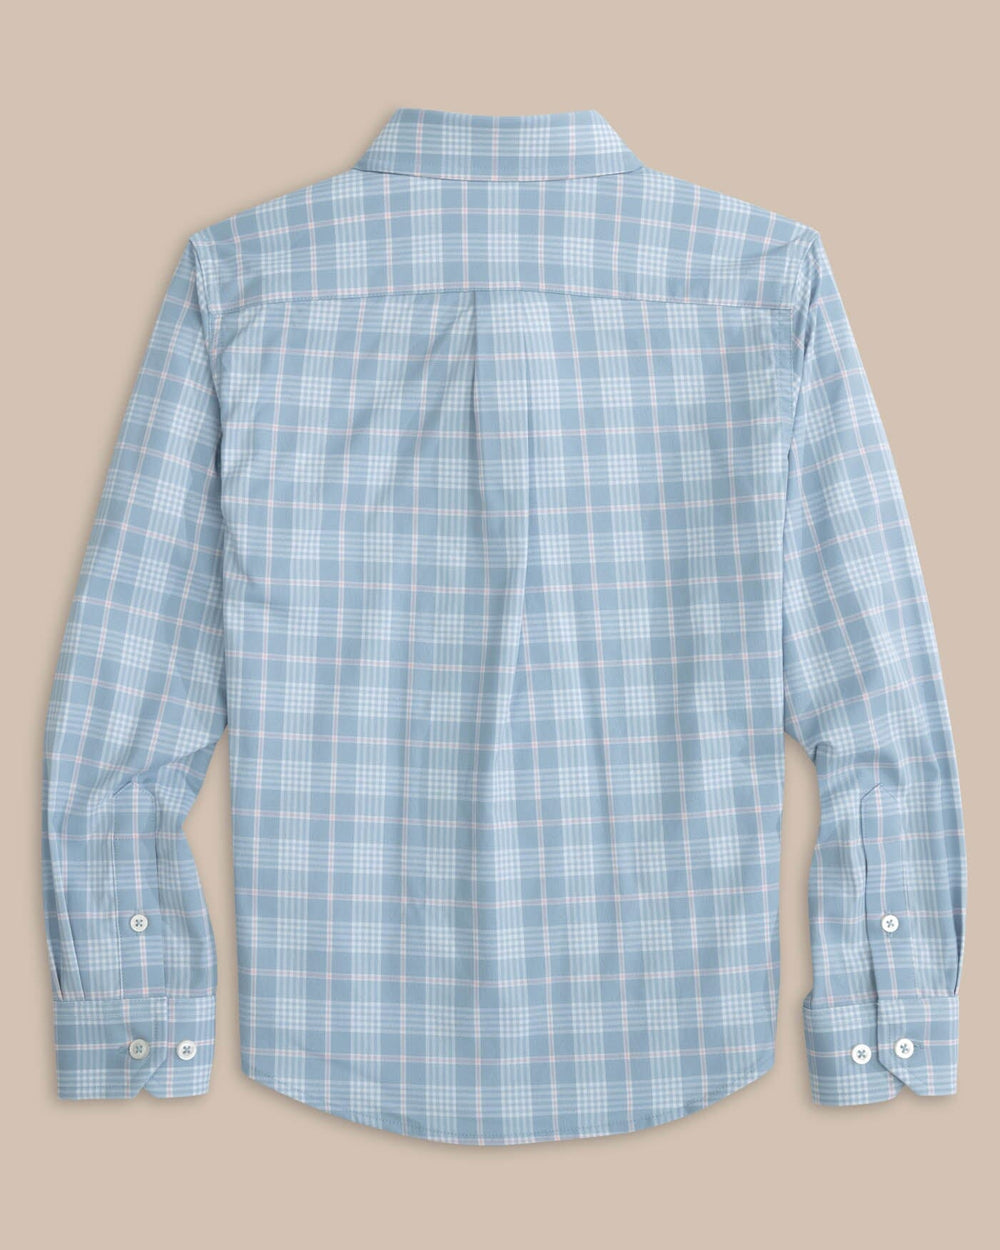 The back view of the Southern Tide Kids Intercoastal Primrose Plaid Long Sleeve Sport Shirt by Southern Tide - Subdued Blue